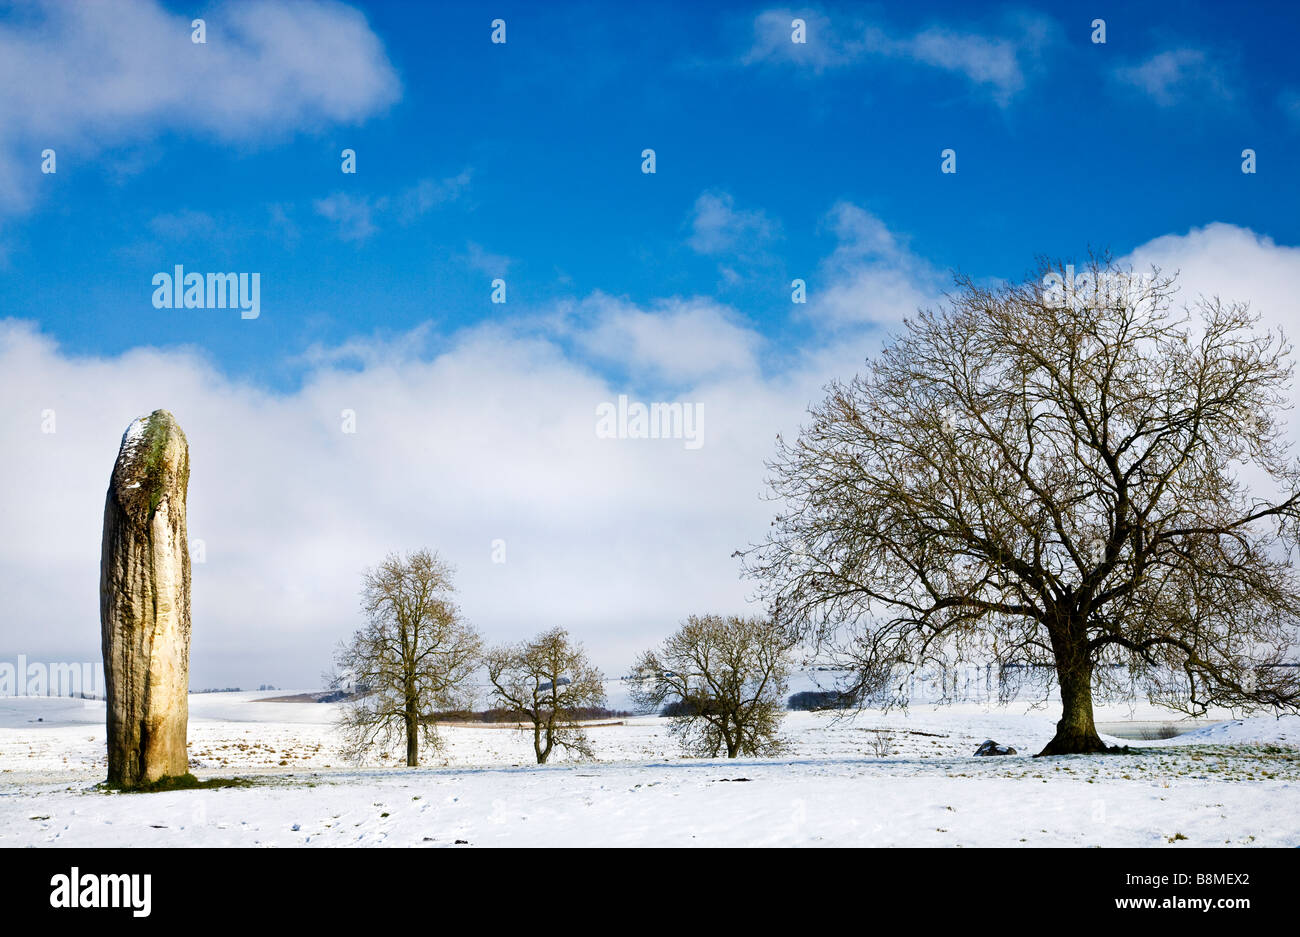 A snowy winter scene at Avebury in Wiltshire England UK Stock Photo